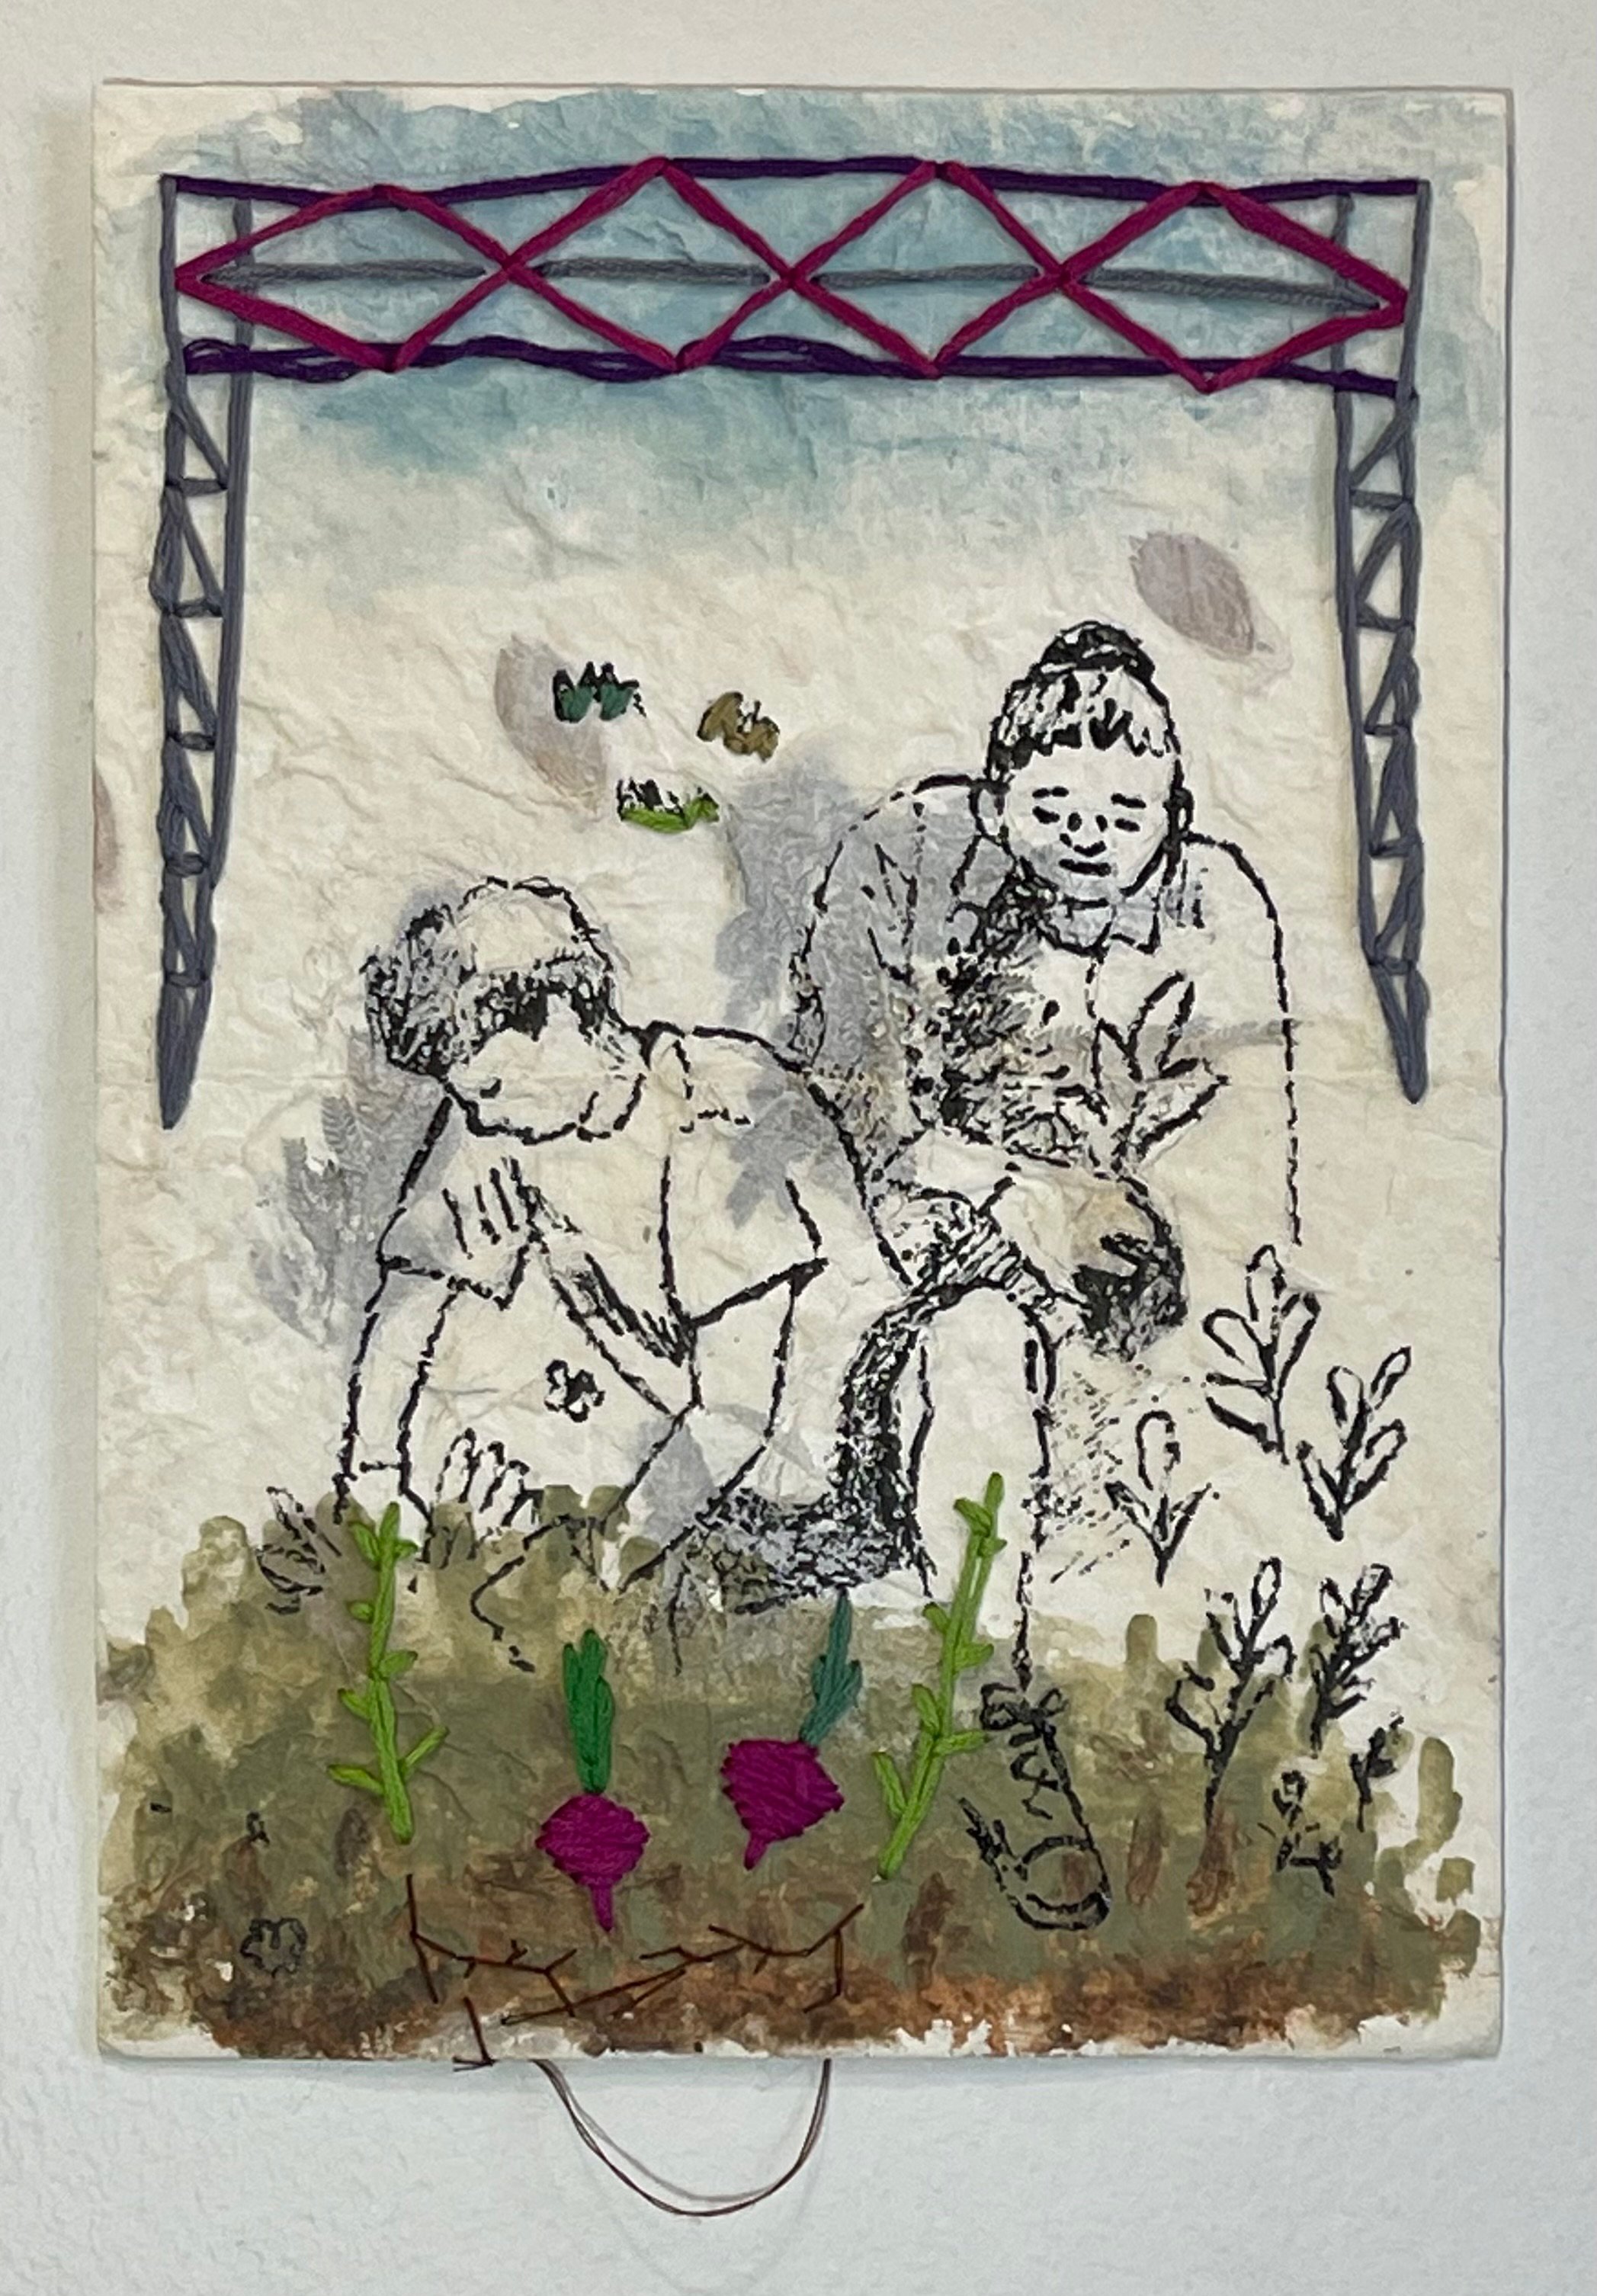  “Mother and Son Gardening”, 10”h x 6.75”w, Acrylic, ink, and embroidery on paper with pressed flowers, 2023   